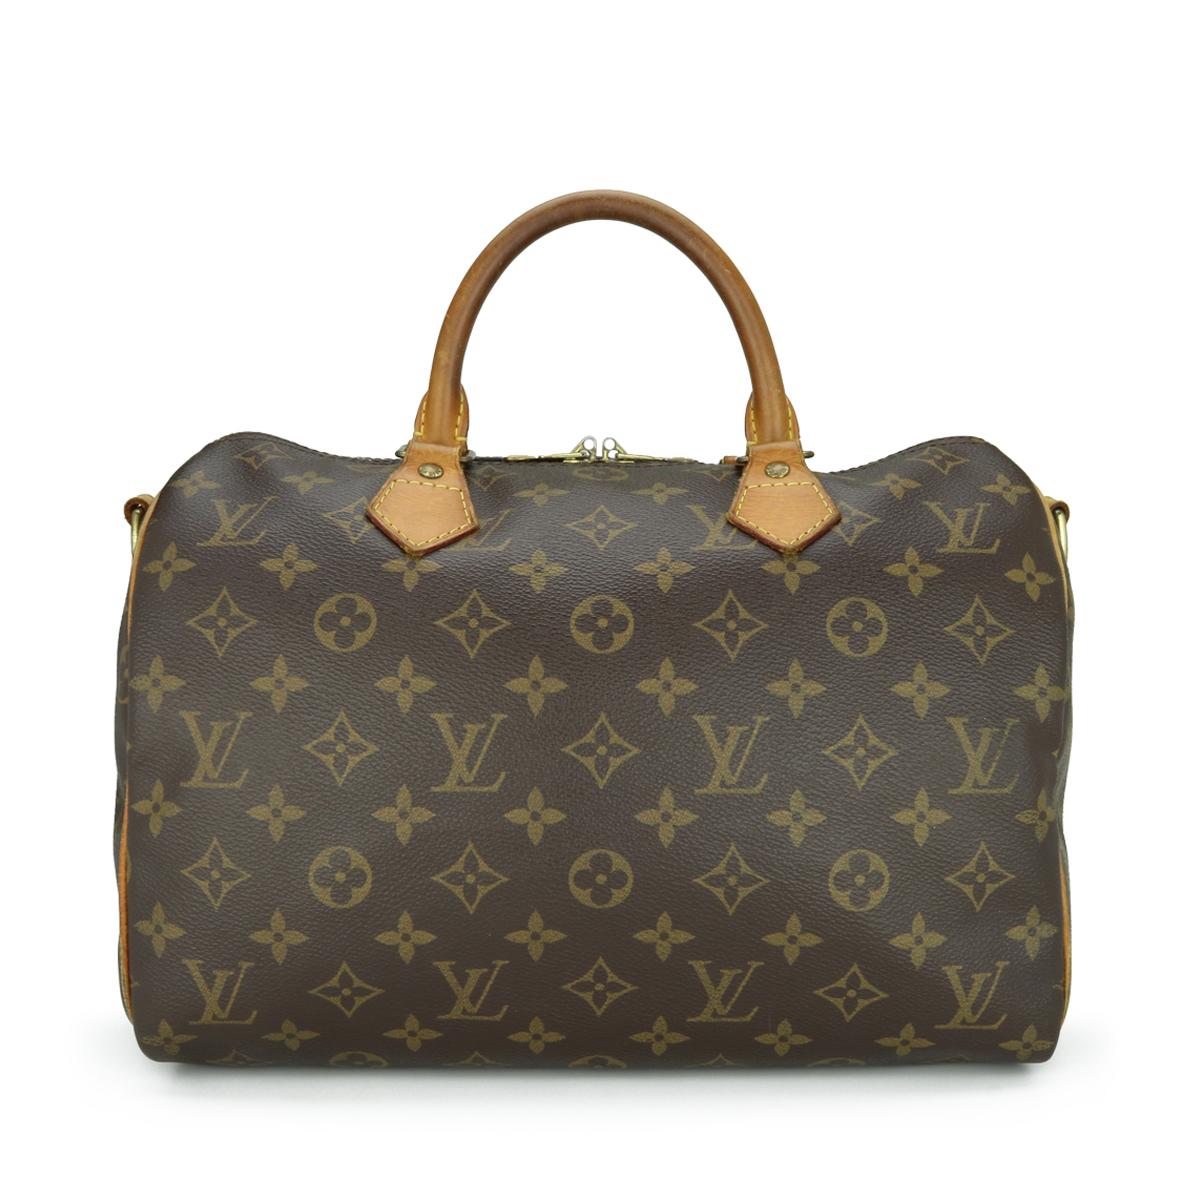 Louis Vuitton Speedy Bandoulière 30 Bag in Monogram 2013.

This bag is in good condition. 

- Exterior Condition: Good condition. Light storage creasing to the canvas. The outside of the bag shows signs of wear - leather/print surface rubbing to